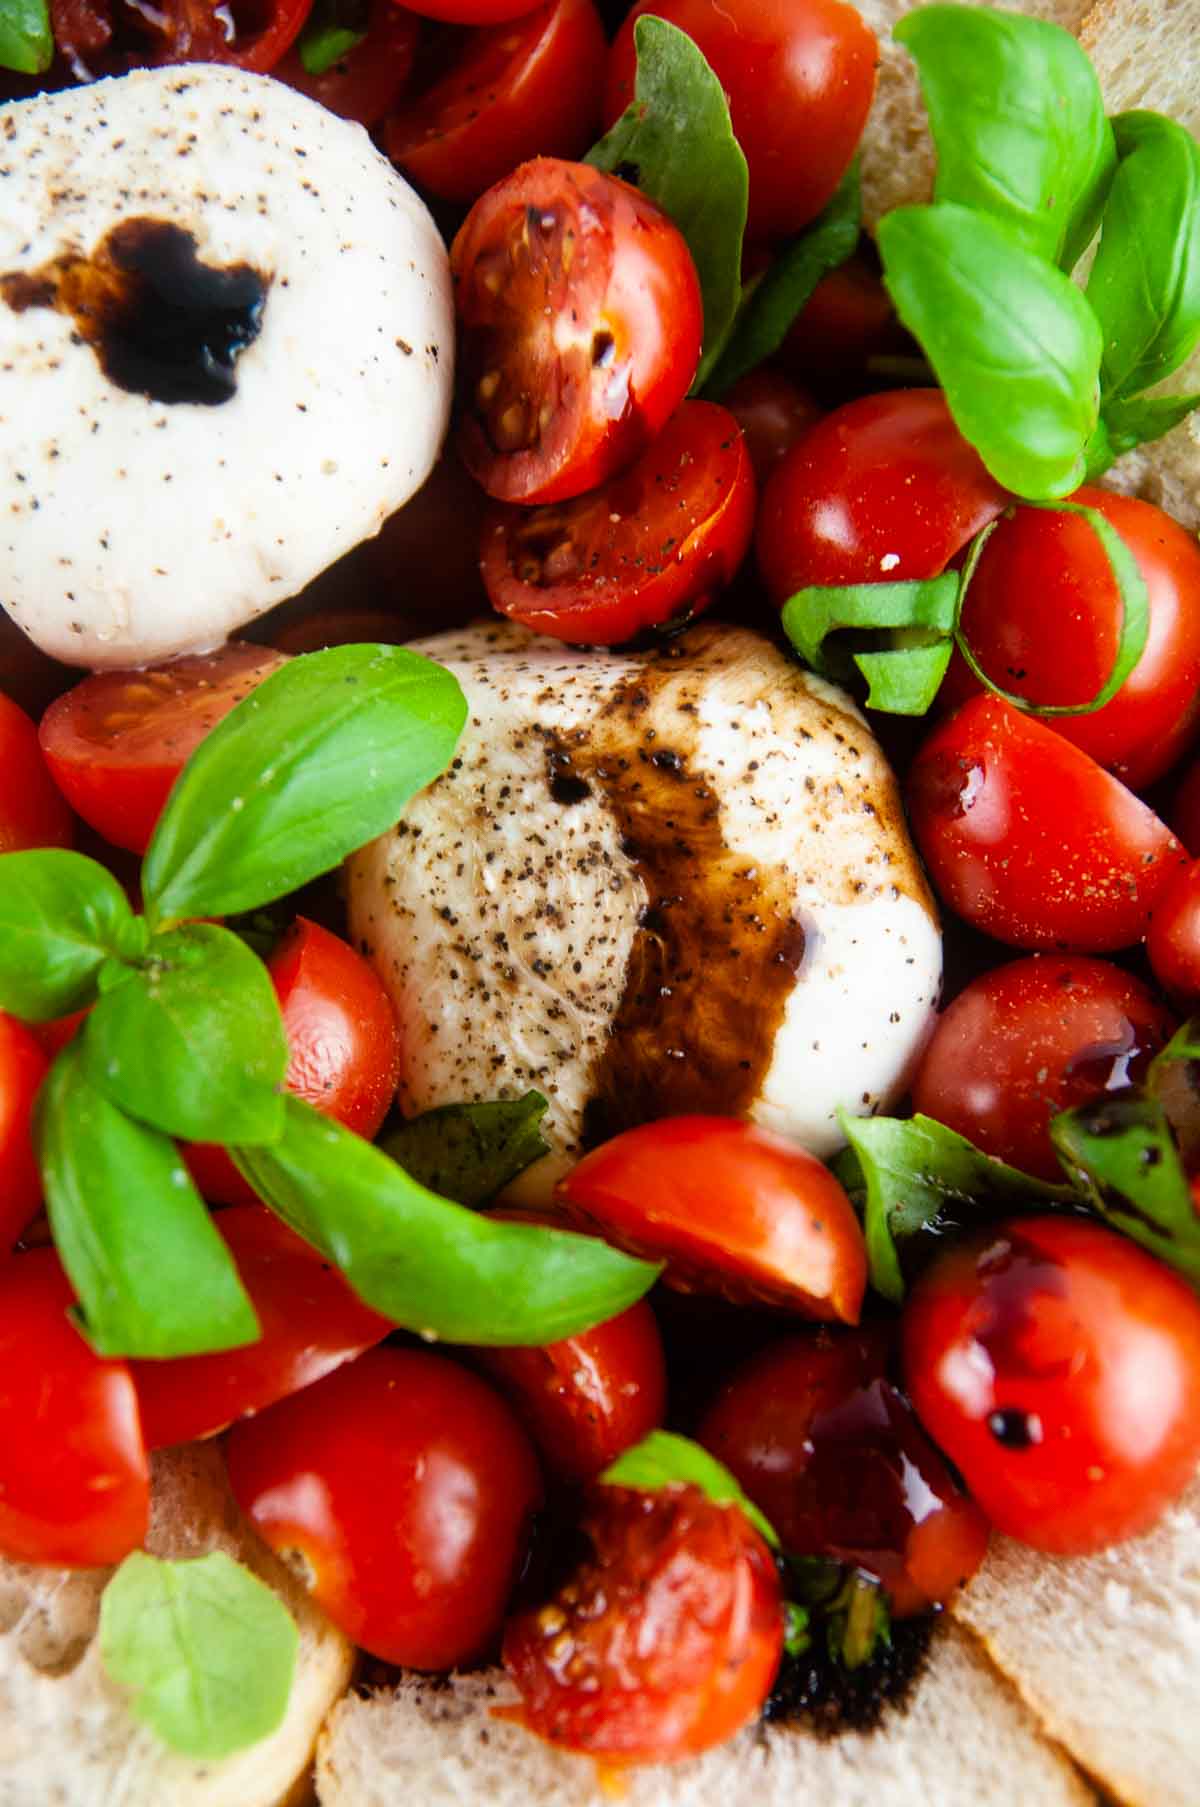 Burrata caprese salad takes the classic flavors of the tomato, mozzarella, and basil combination and turns it up a notch with decadent burrata cheese. This easy variation of caprese with burrata makes for an effortlessly elegant dinner or appetizer anytime.